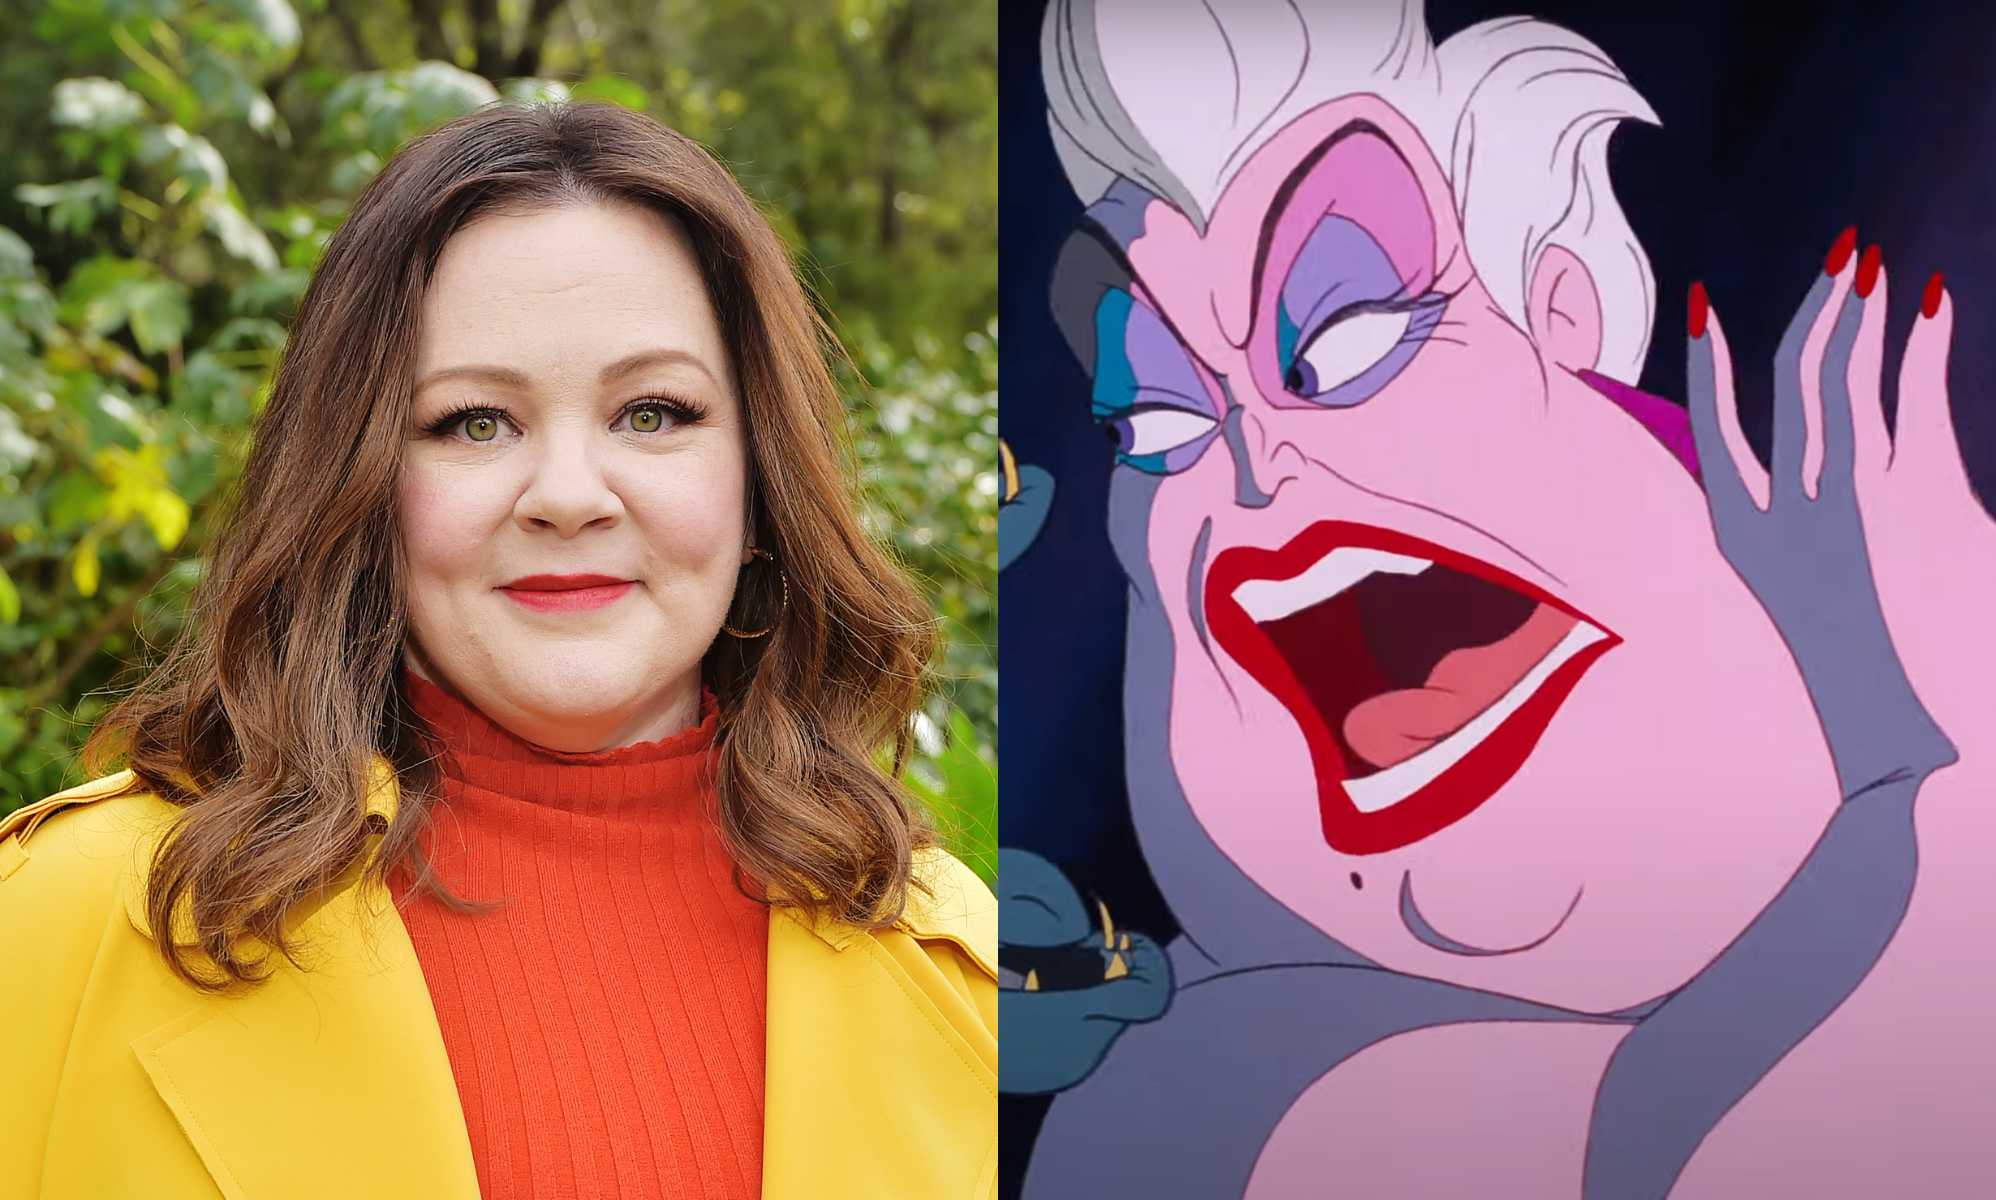 The Little Mermaid trailer gags fans with Melissa McCarthy's Ursula